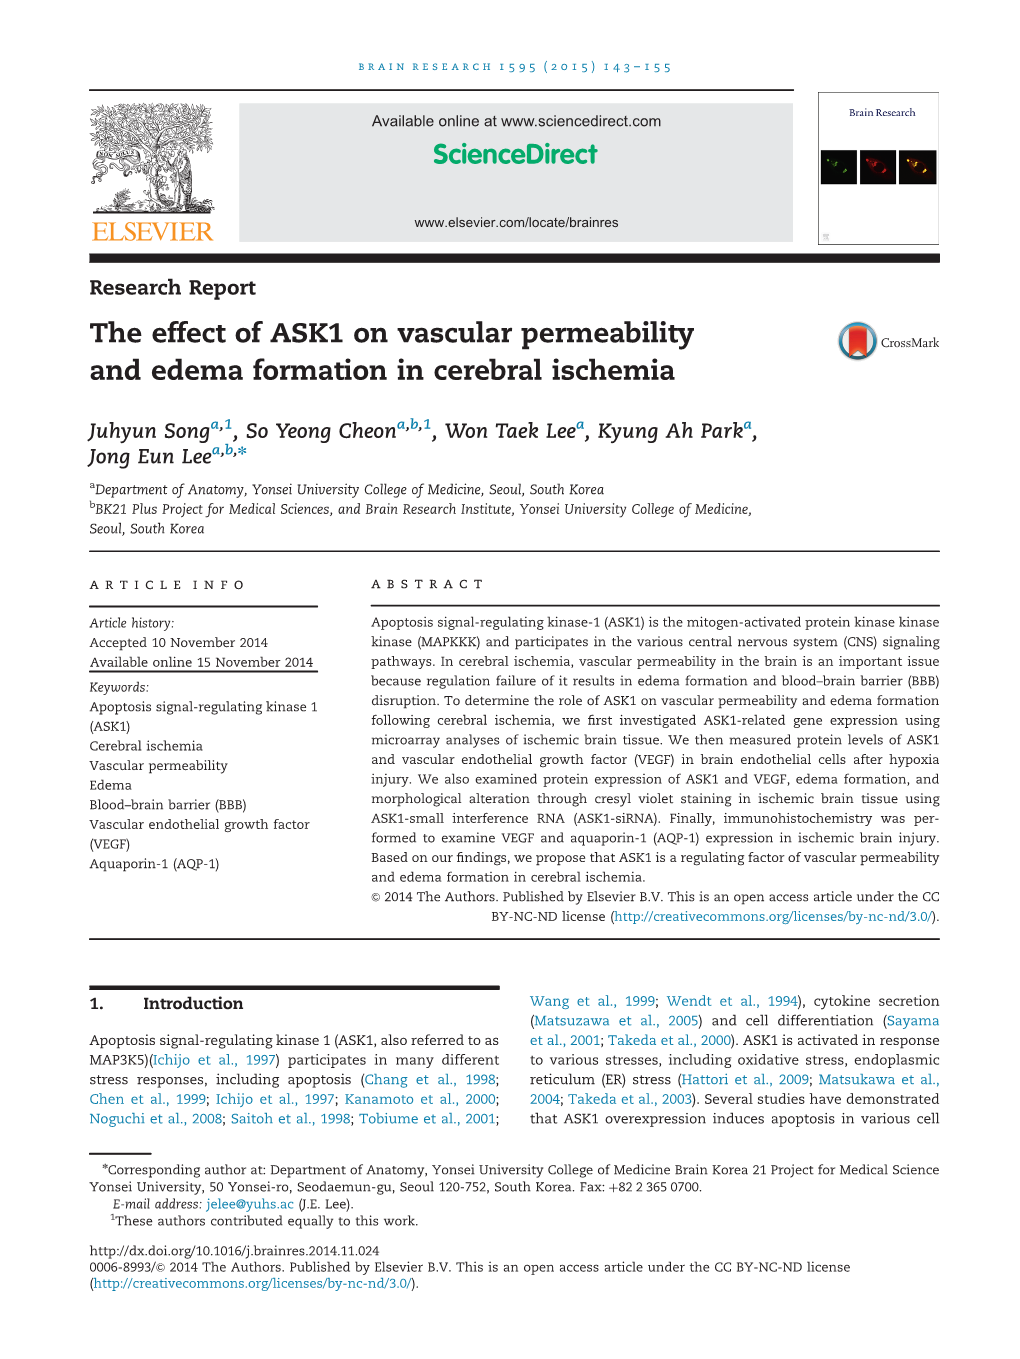 The Effect of ASK1 on Vascular Permeability and Edema Formation in Cerebral Ischemia